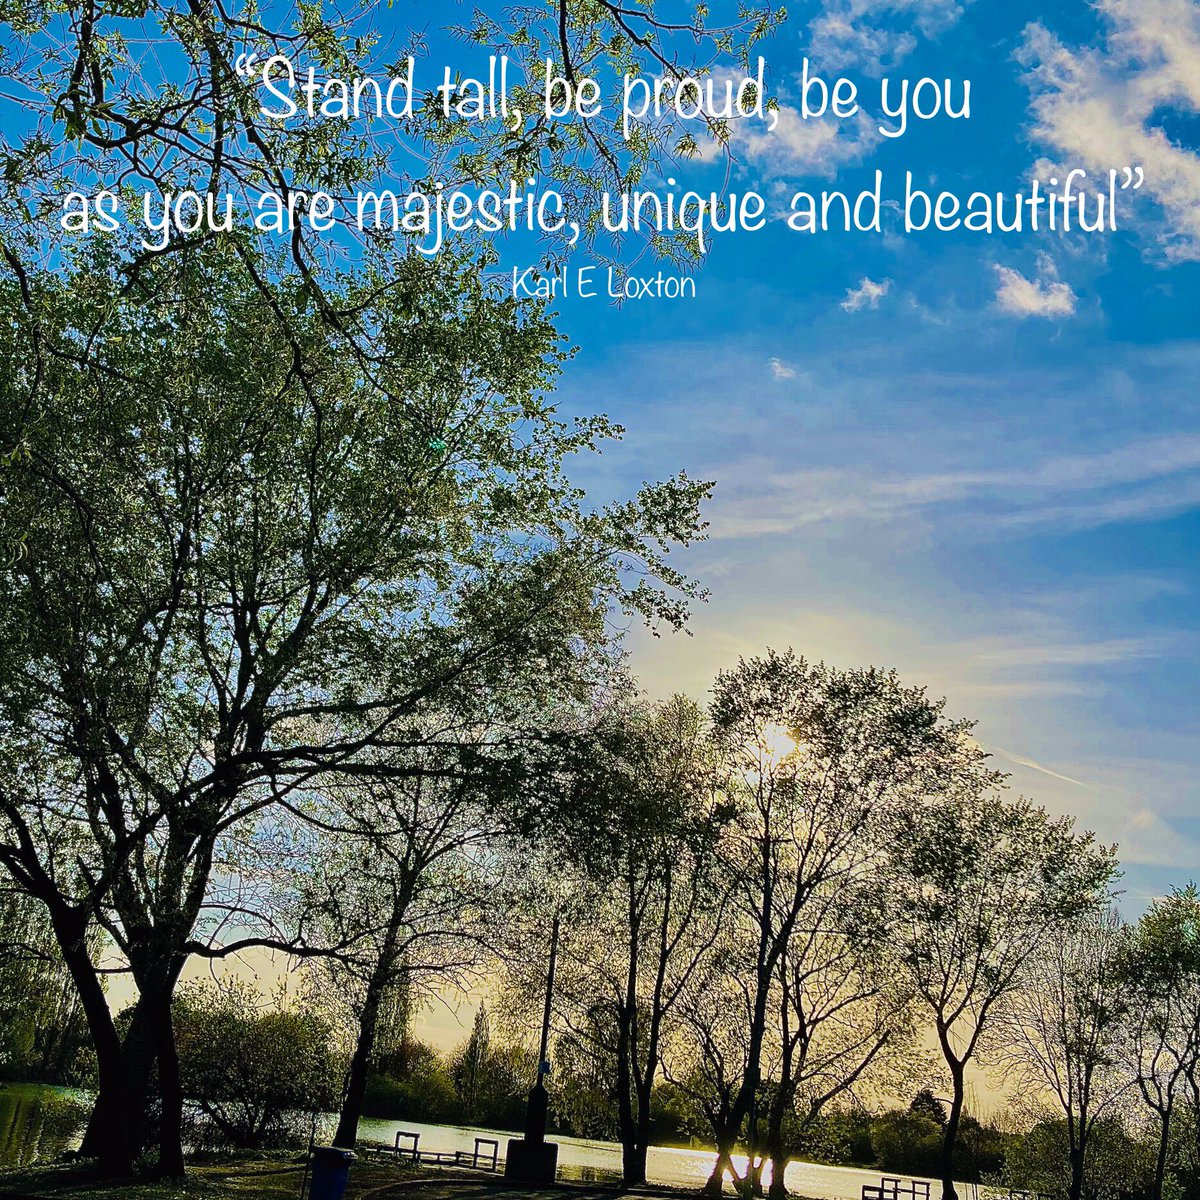 #ThoughtForTheWeek #StandTall #quotesaboutlife 
“Stand tall, be proud, be you as you are majestic, unique and beautiful”